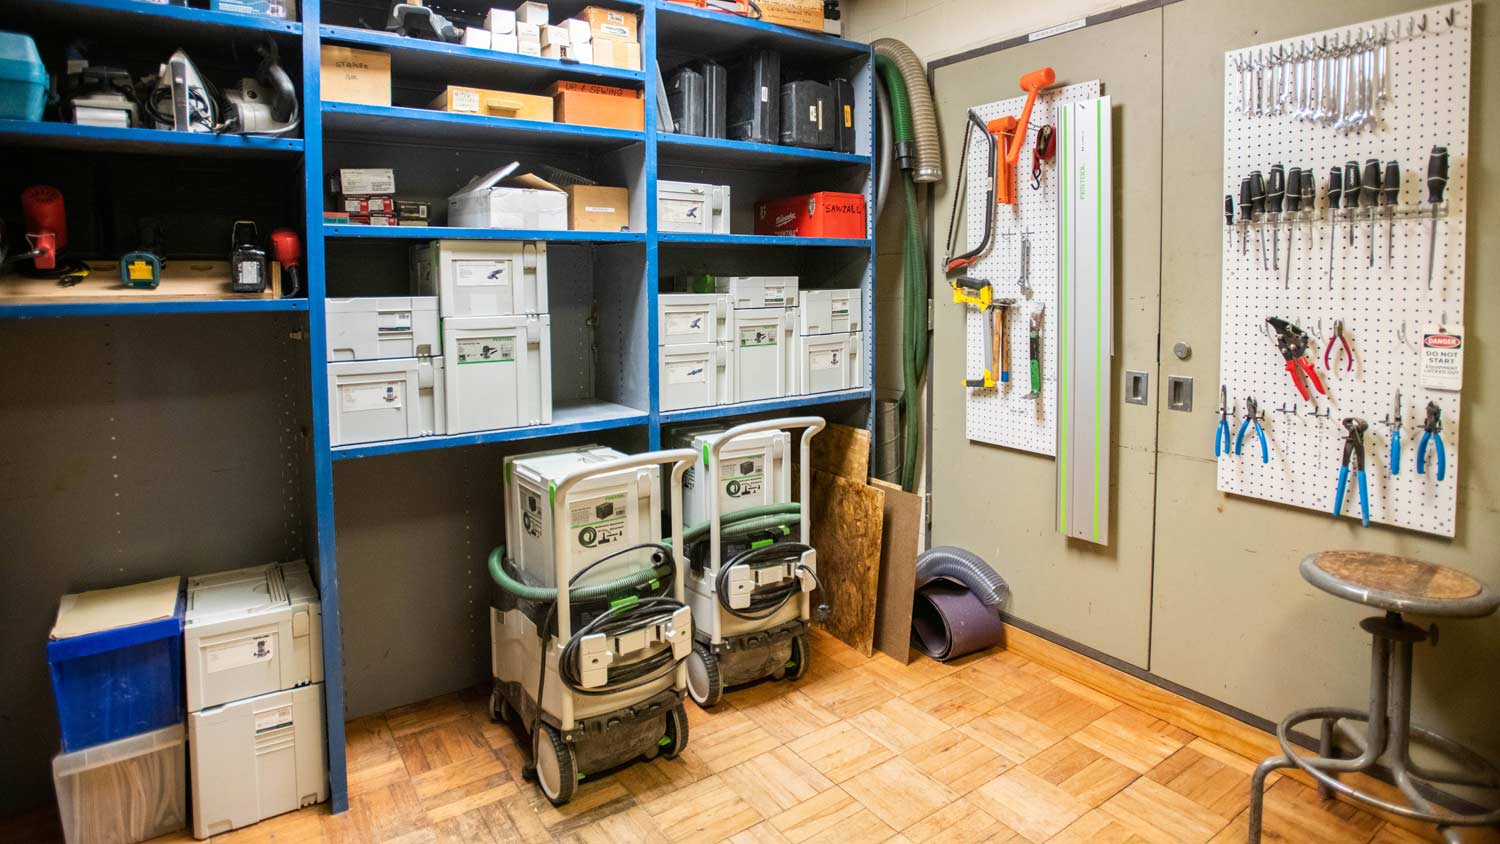 Tool room with rentable tools and portable equipment.